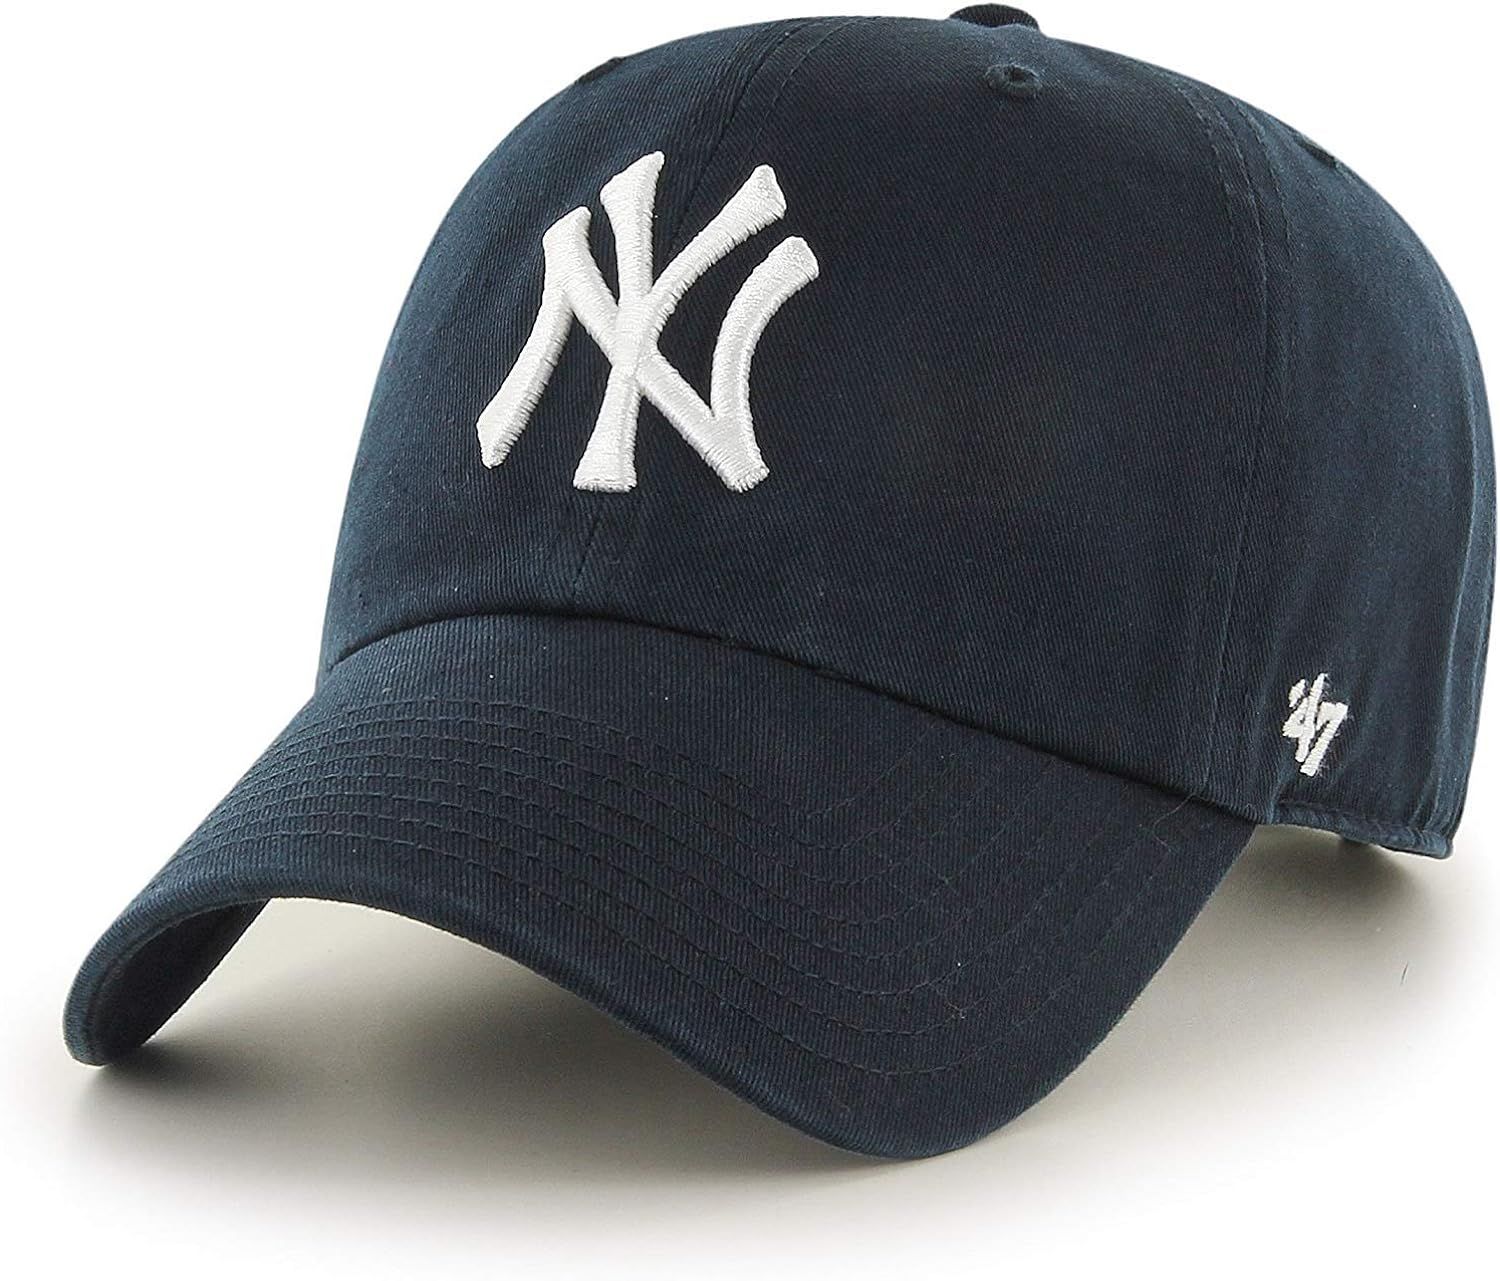 Amazon.com : MLB New York Yankees Men's '47 Brand Home Clean Up Cap, Navy, One-Size : Sports Fan ... | Amazon (US)